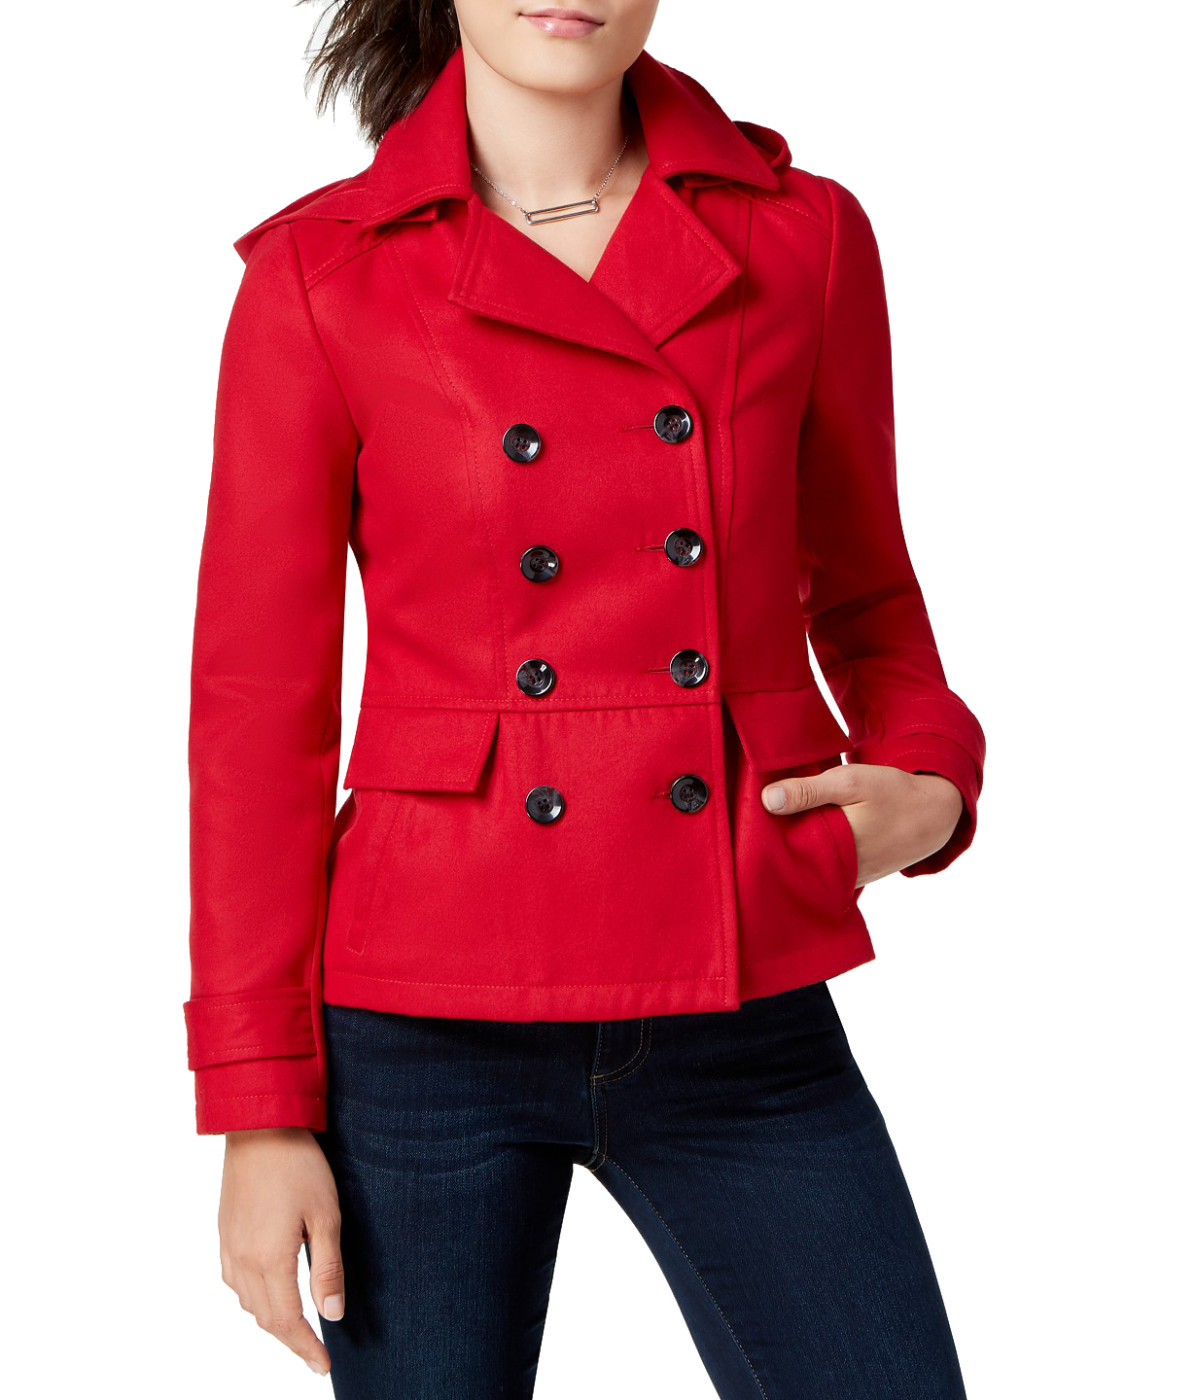 woocommerce-673321-2209615.cloudwaysapps.com-celebrity-pink-womens-red-double-breasted-hooded-peacoat-jacket